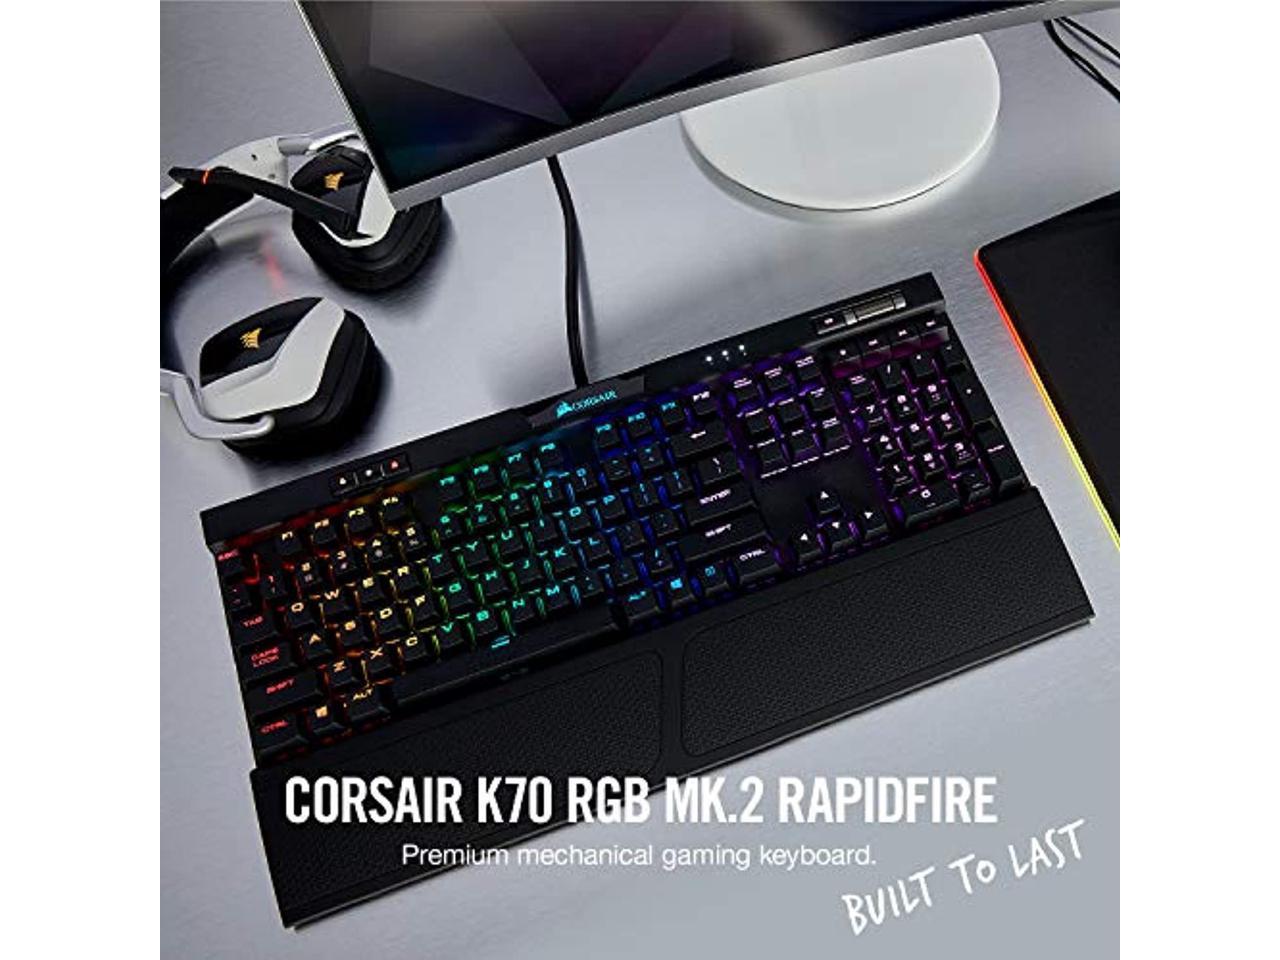 Corsair K70 RGB MK.2 Rapidfire Mechanical Gaming Keyboard - USB Passthrough  and Media Controls - Fastest and Linear - Cherry MX Speed - RGB LED 